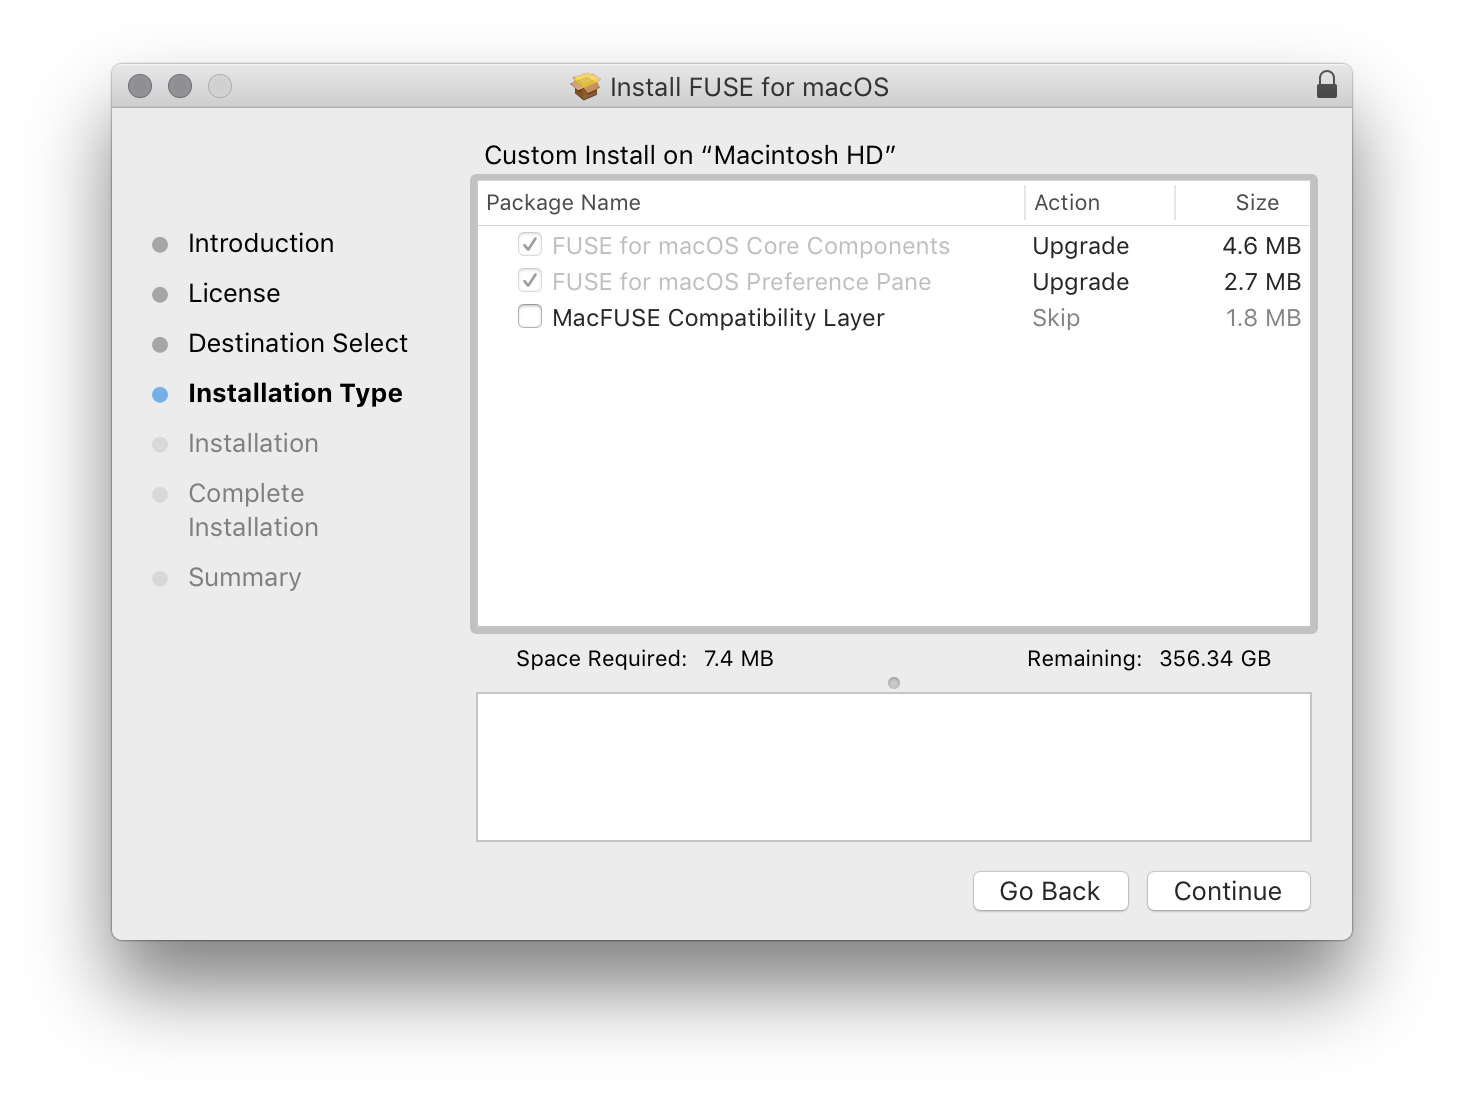 Installing FUSE for macOS